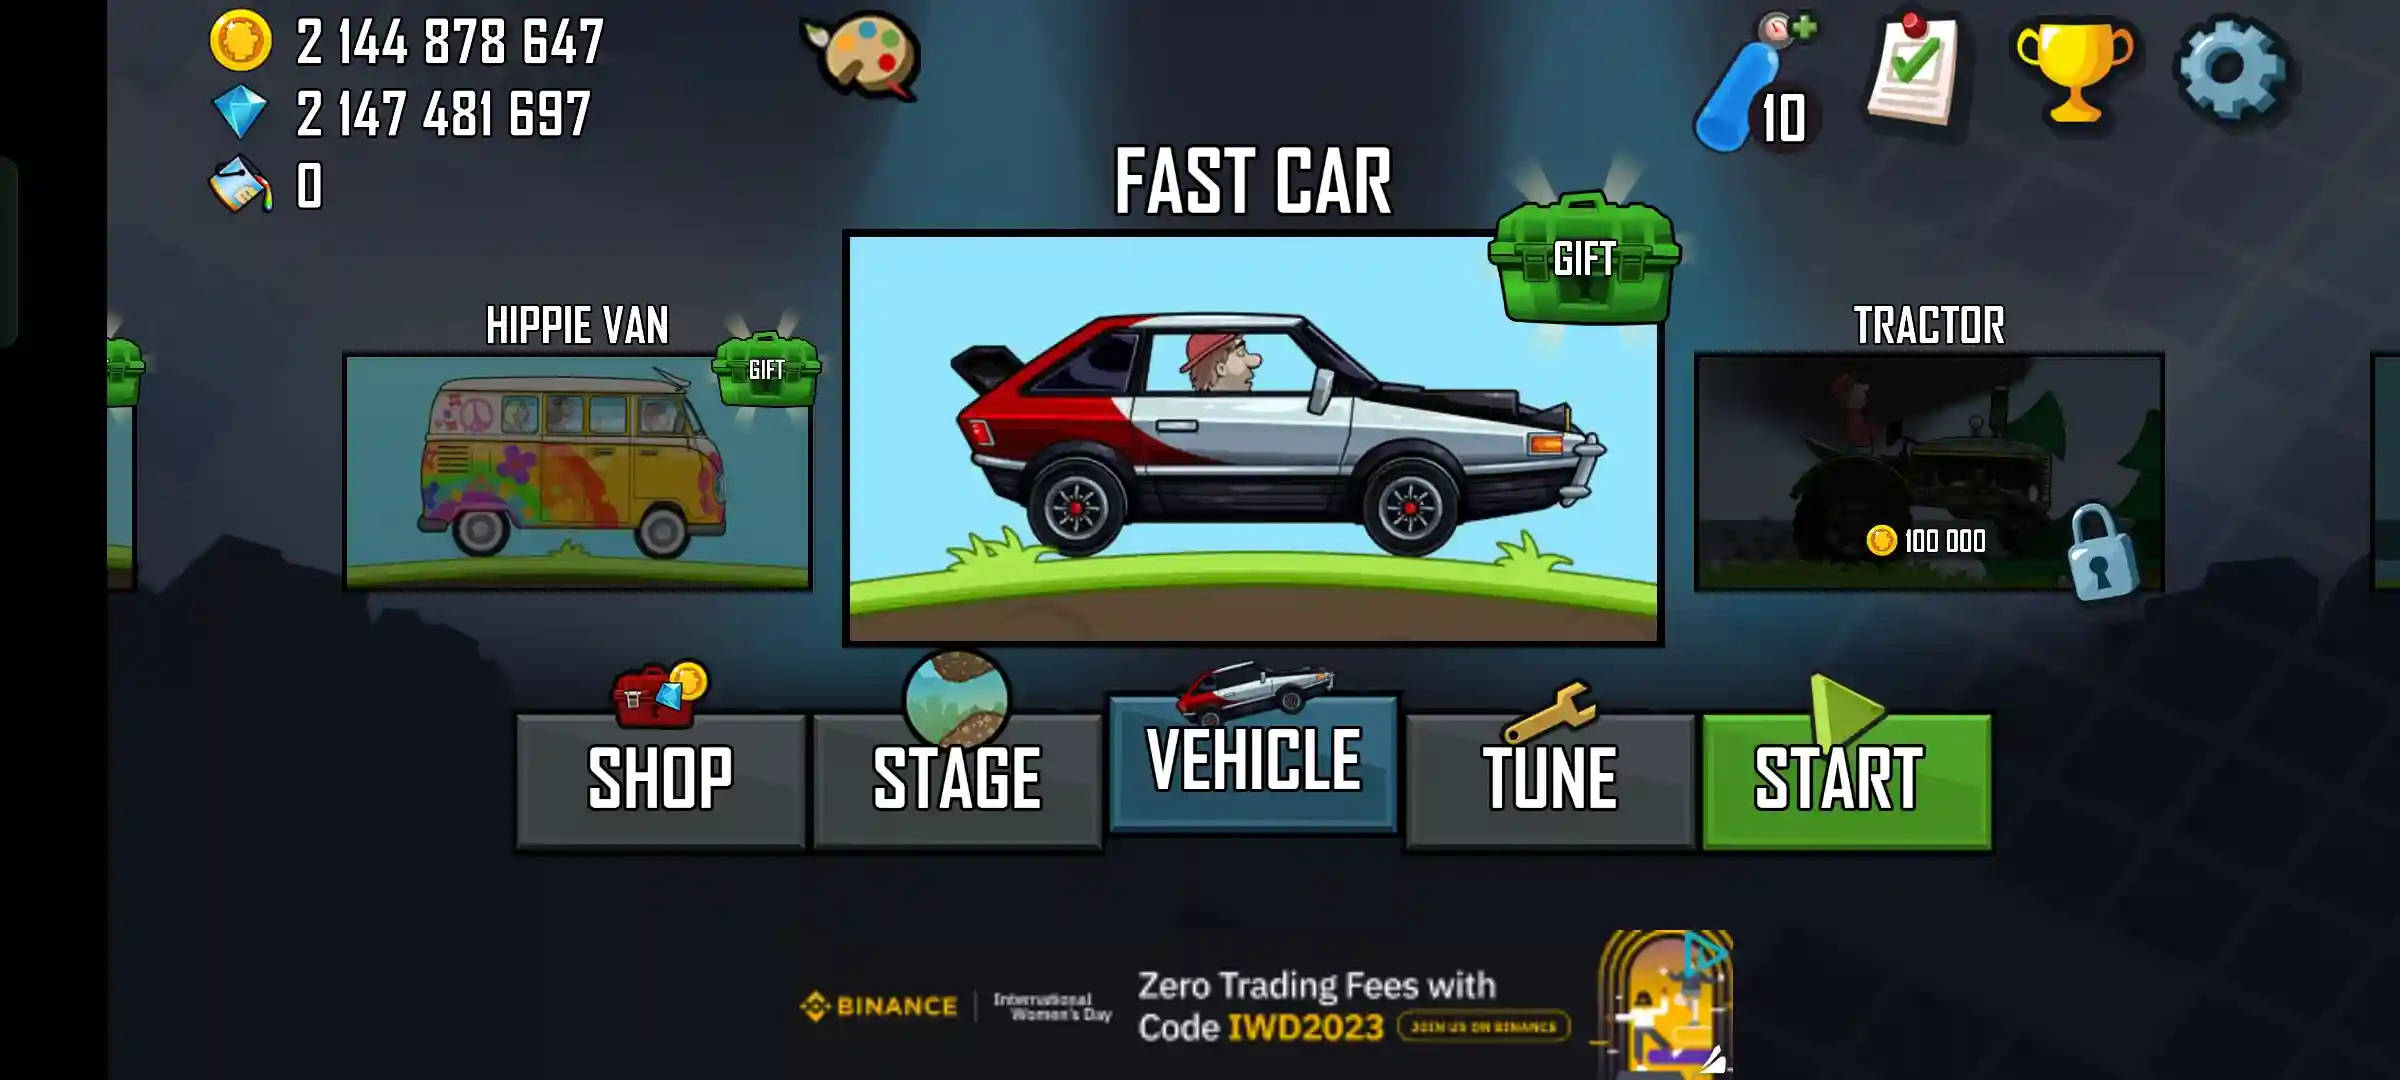 Hill Climb Racing Mod Apk v1.60.0 Unlimited Fuel And Money And Gems